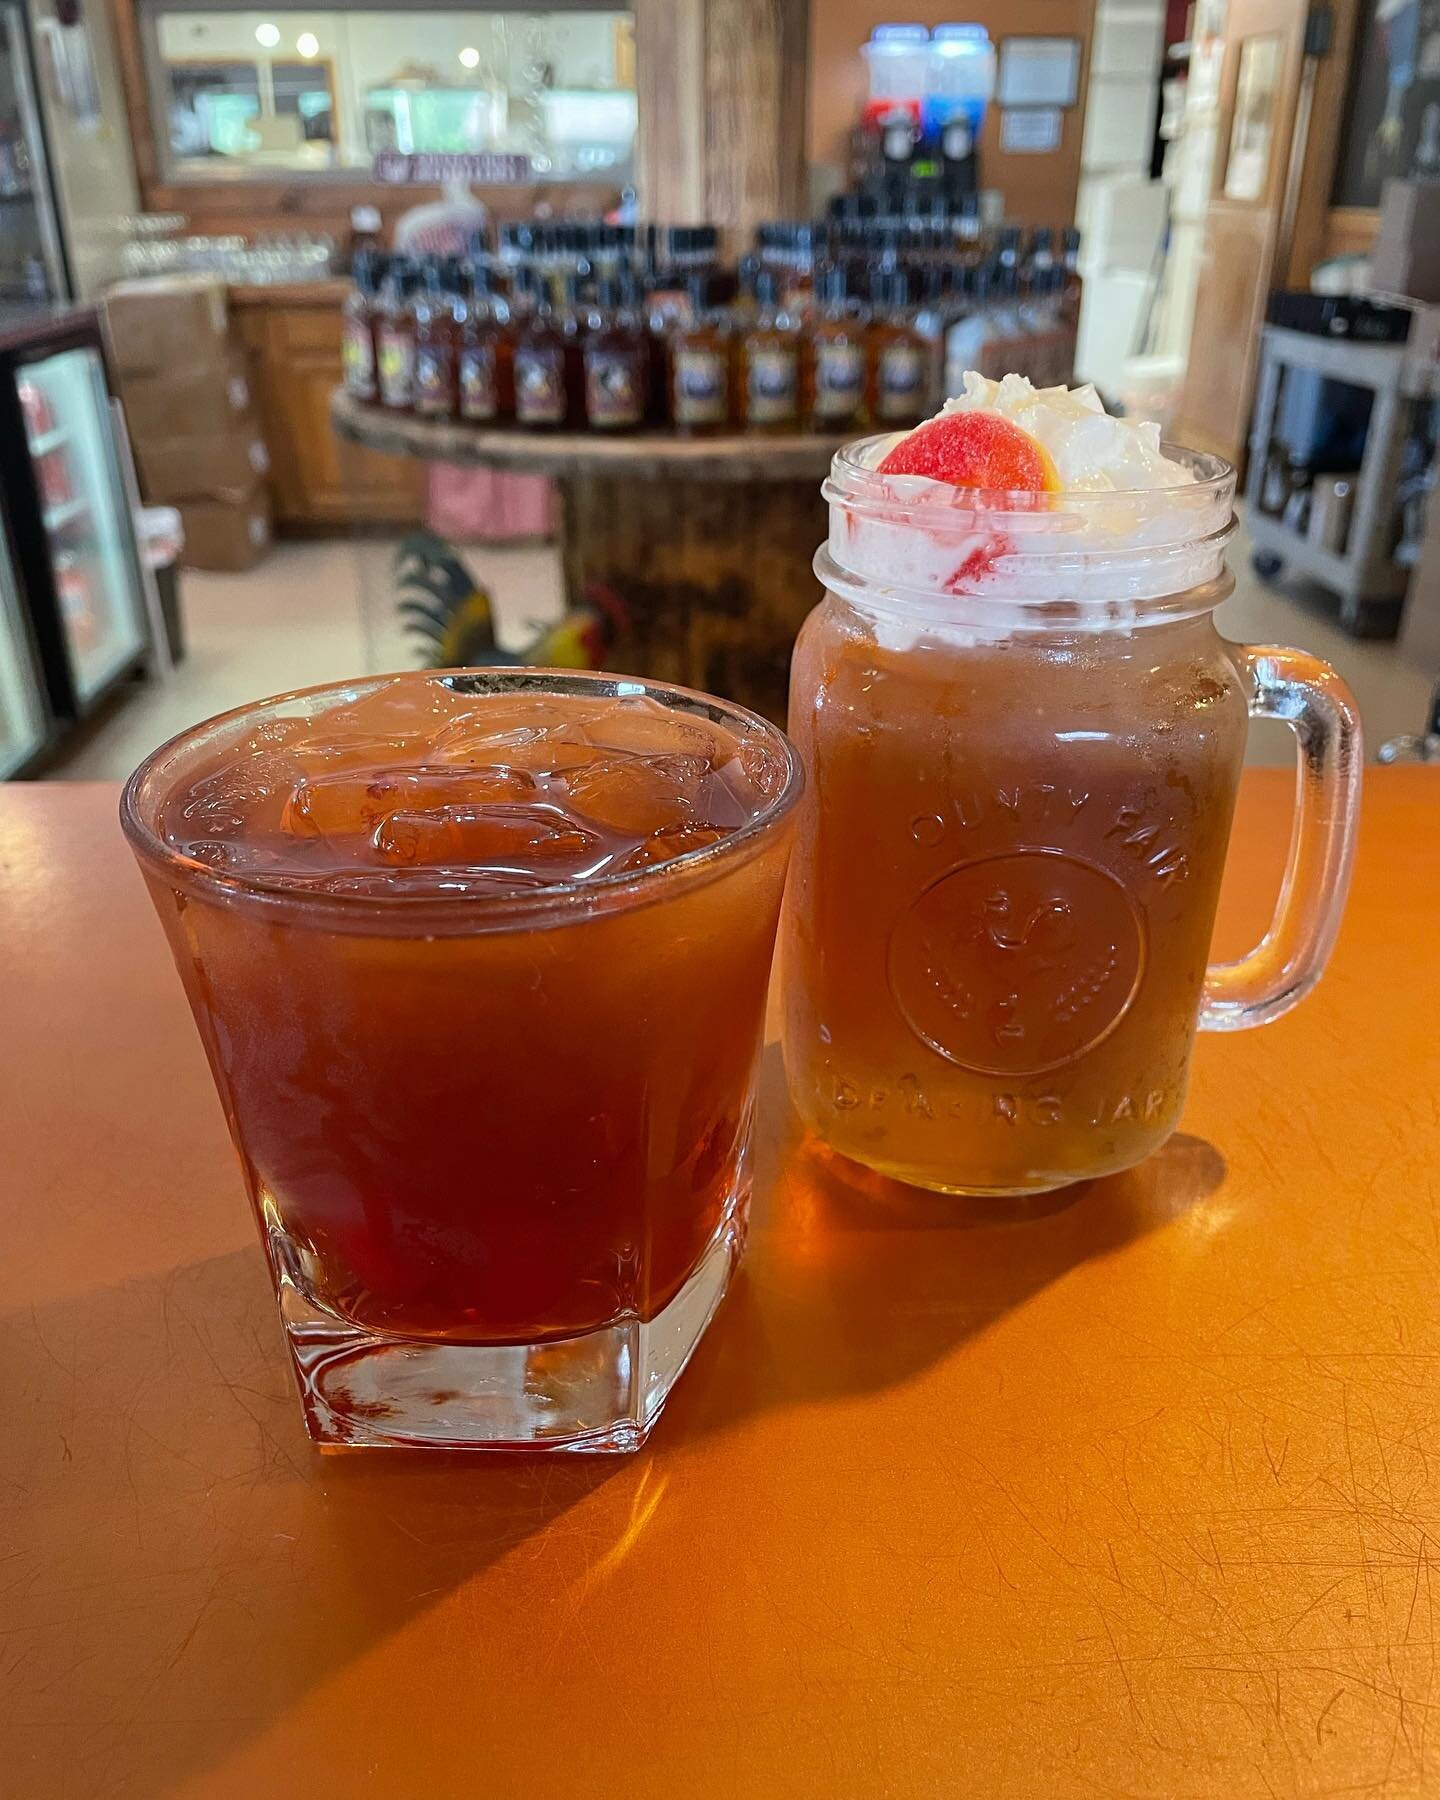 Two new cocktails! Cherry bourbon tea and Peach cobbler 😋 plus and entire cocktail menu. Come try what we have! 🍹(main store only)